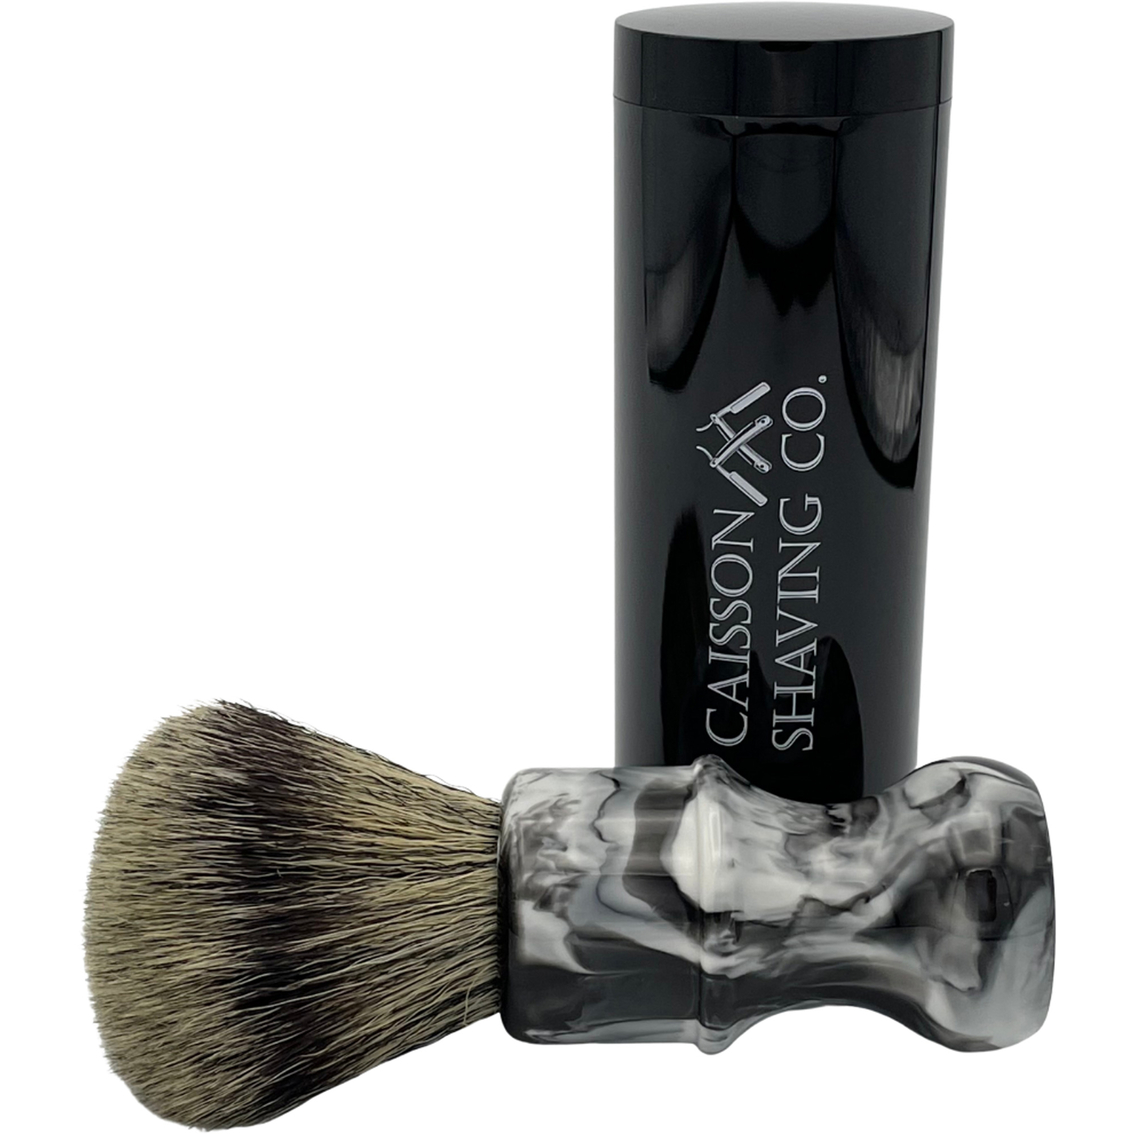 Caisson Shaving Co. 24mm Synthetic Shaving Brush with Travel Tube - Image 2 of 4